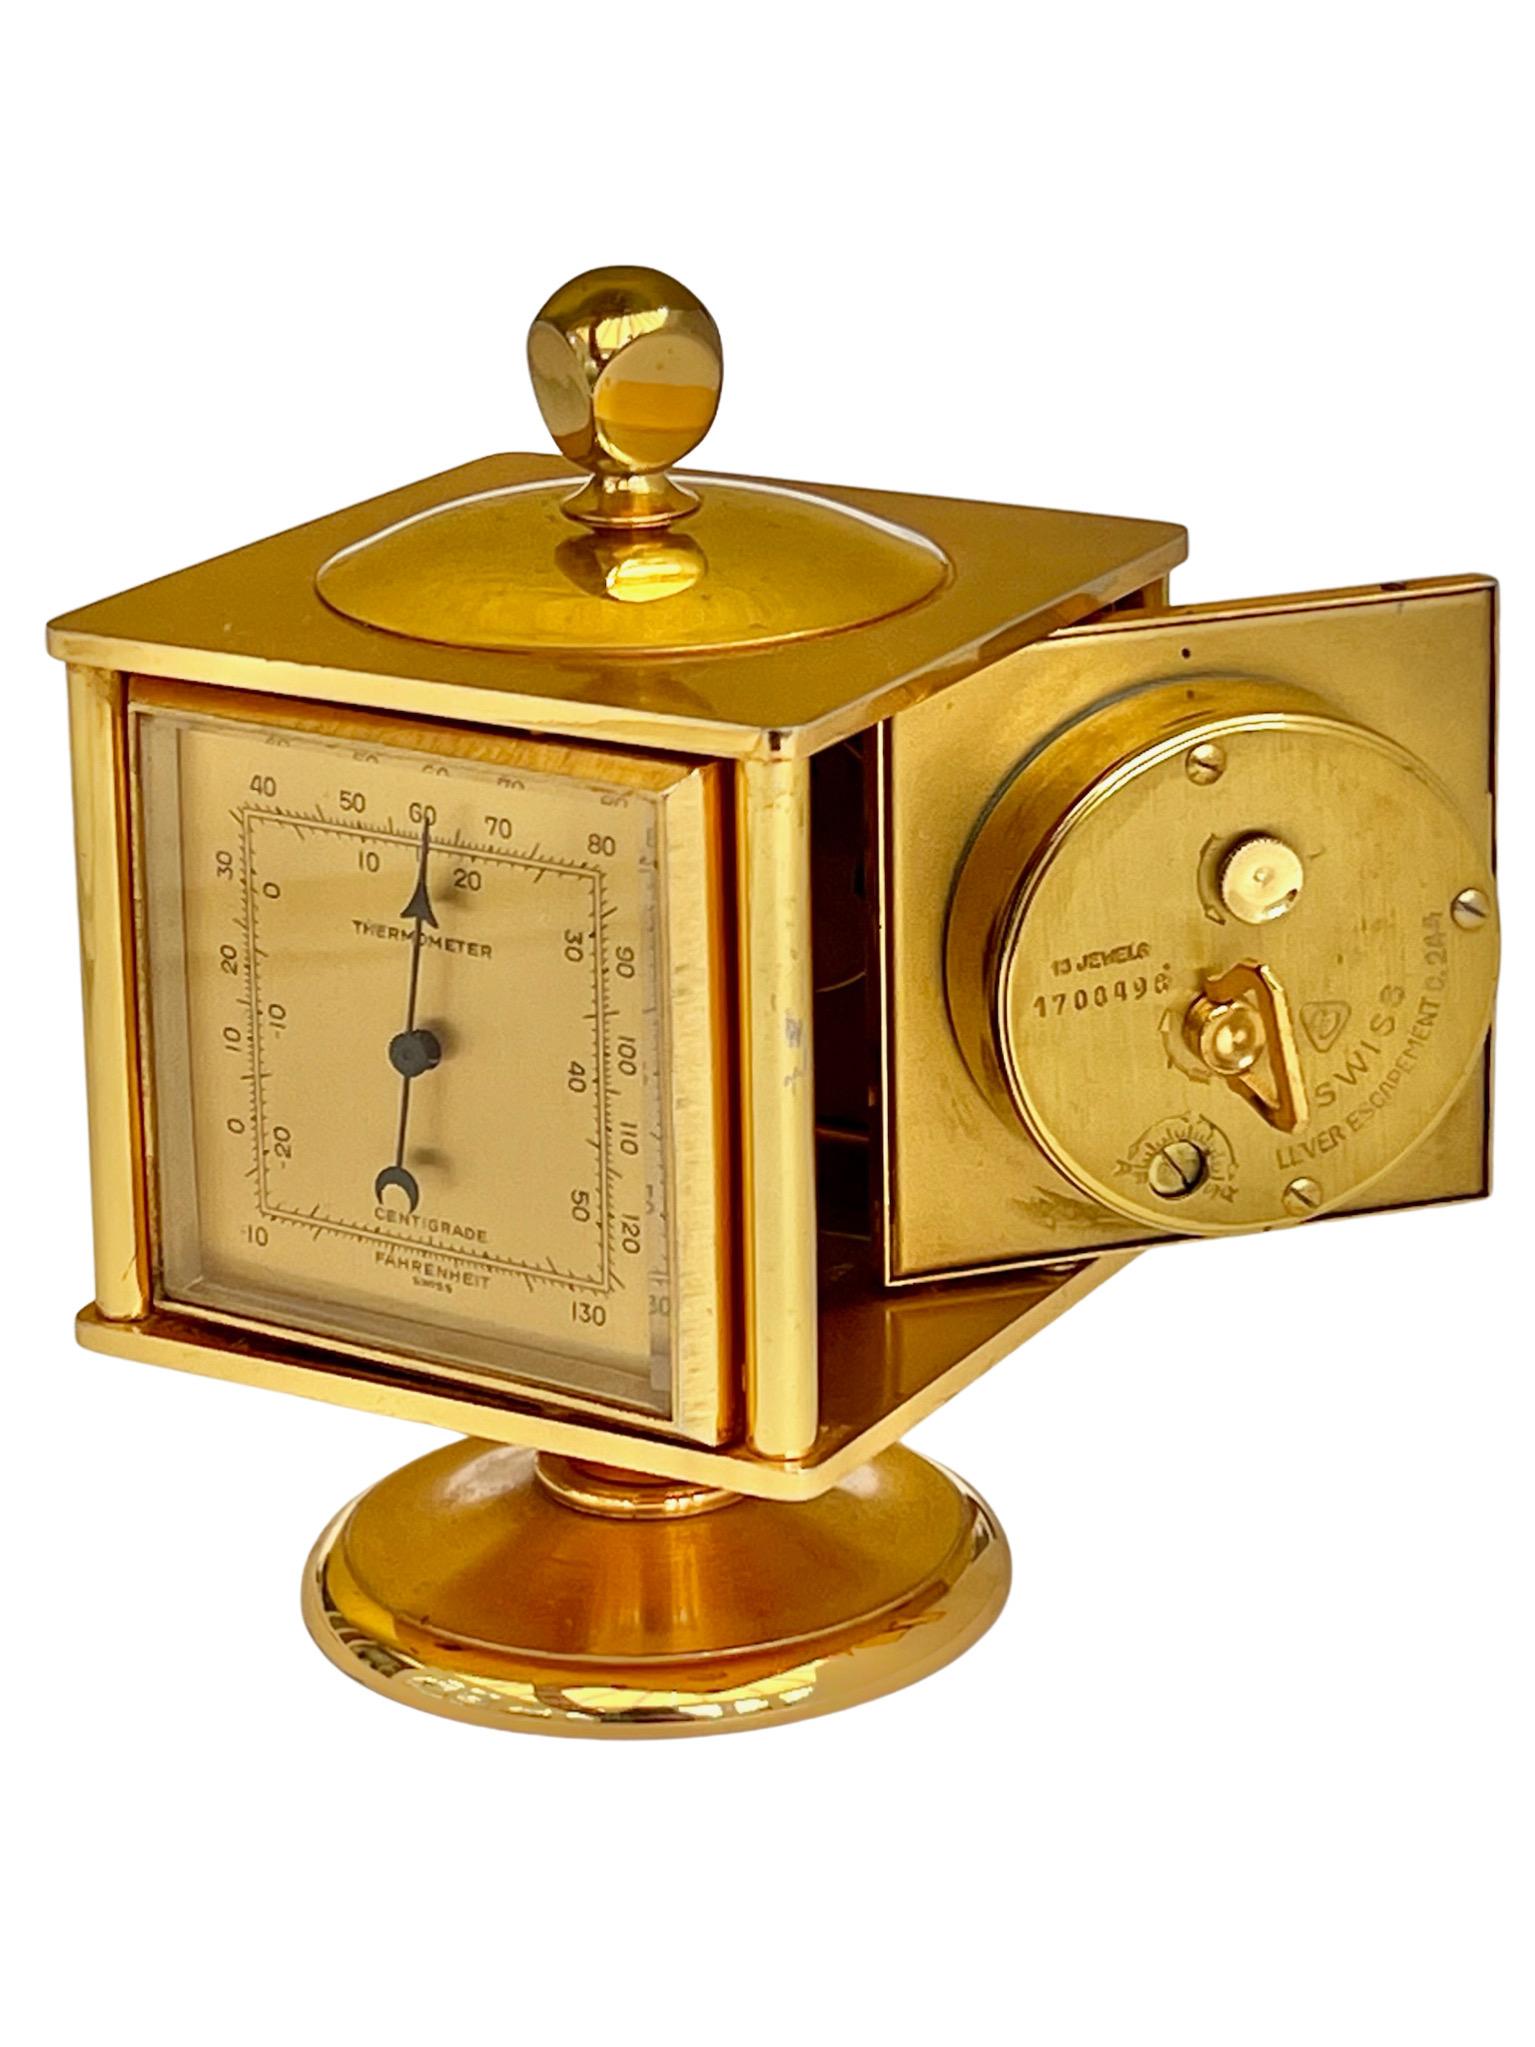 Imhof Midcentury Gilt Desk Clock and Weather Compendium For Sale 7